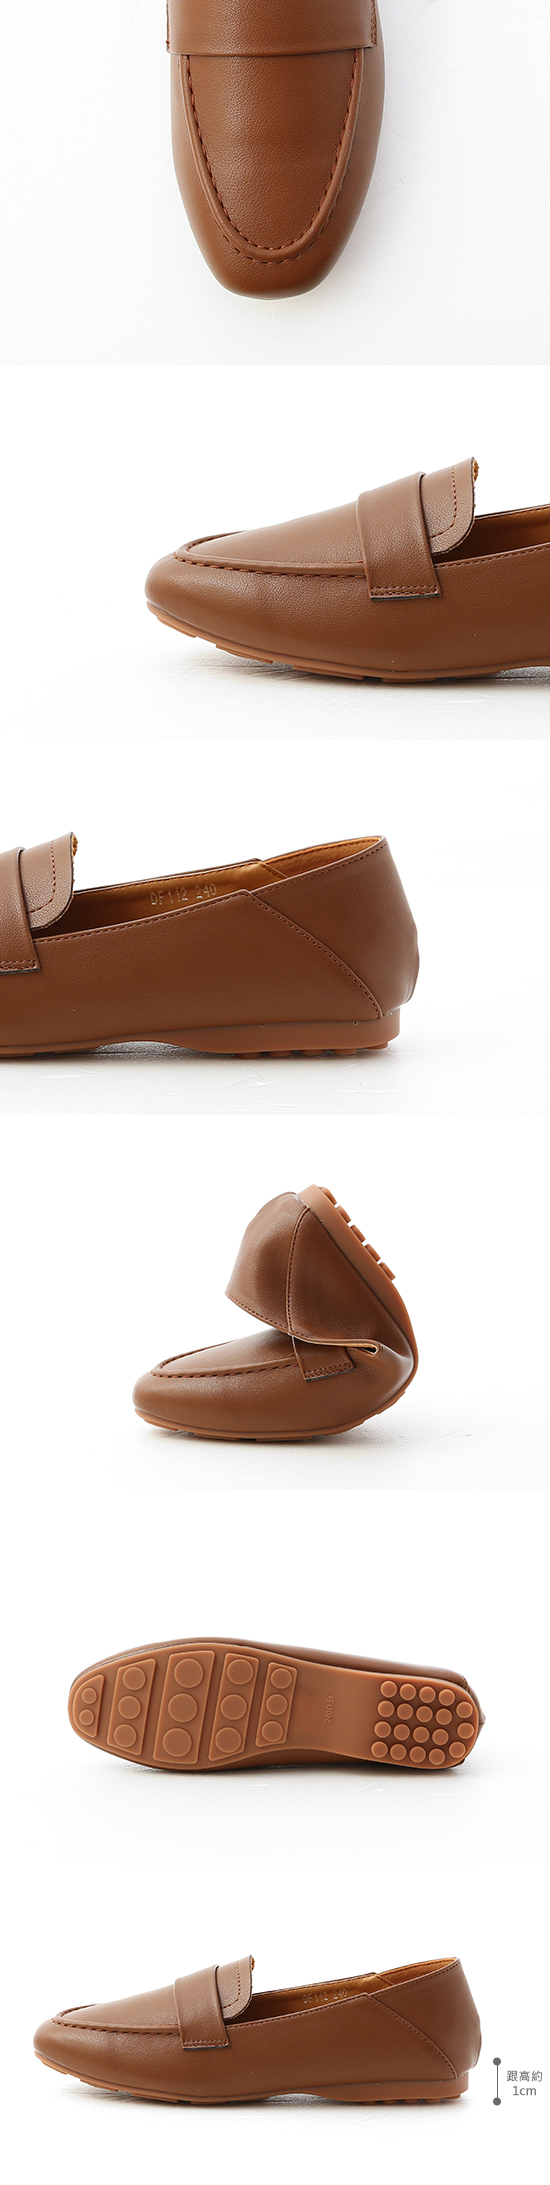 Soft Faux Leather Foldback Loafers Brown